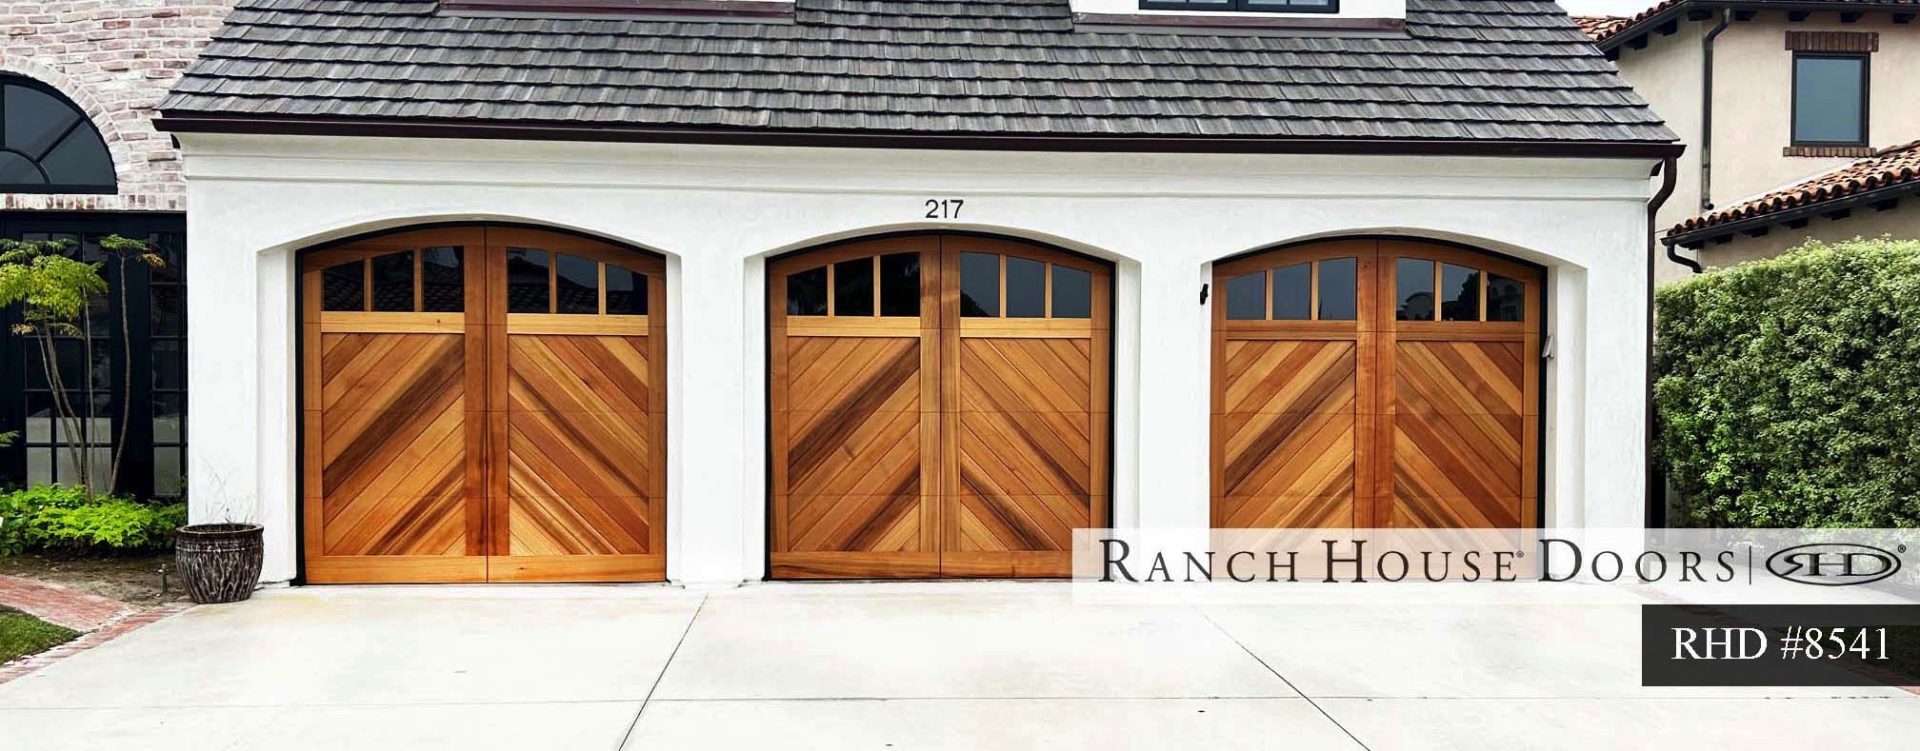 A traditional ranch house with a carriage style garage door in a suburban neighborhood.